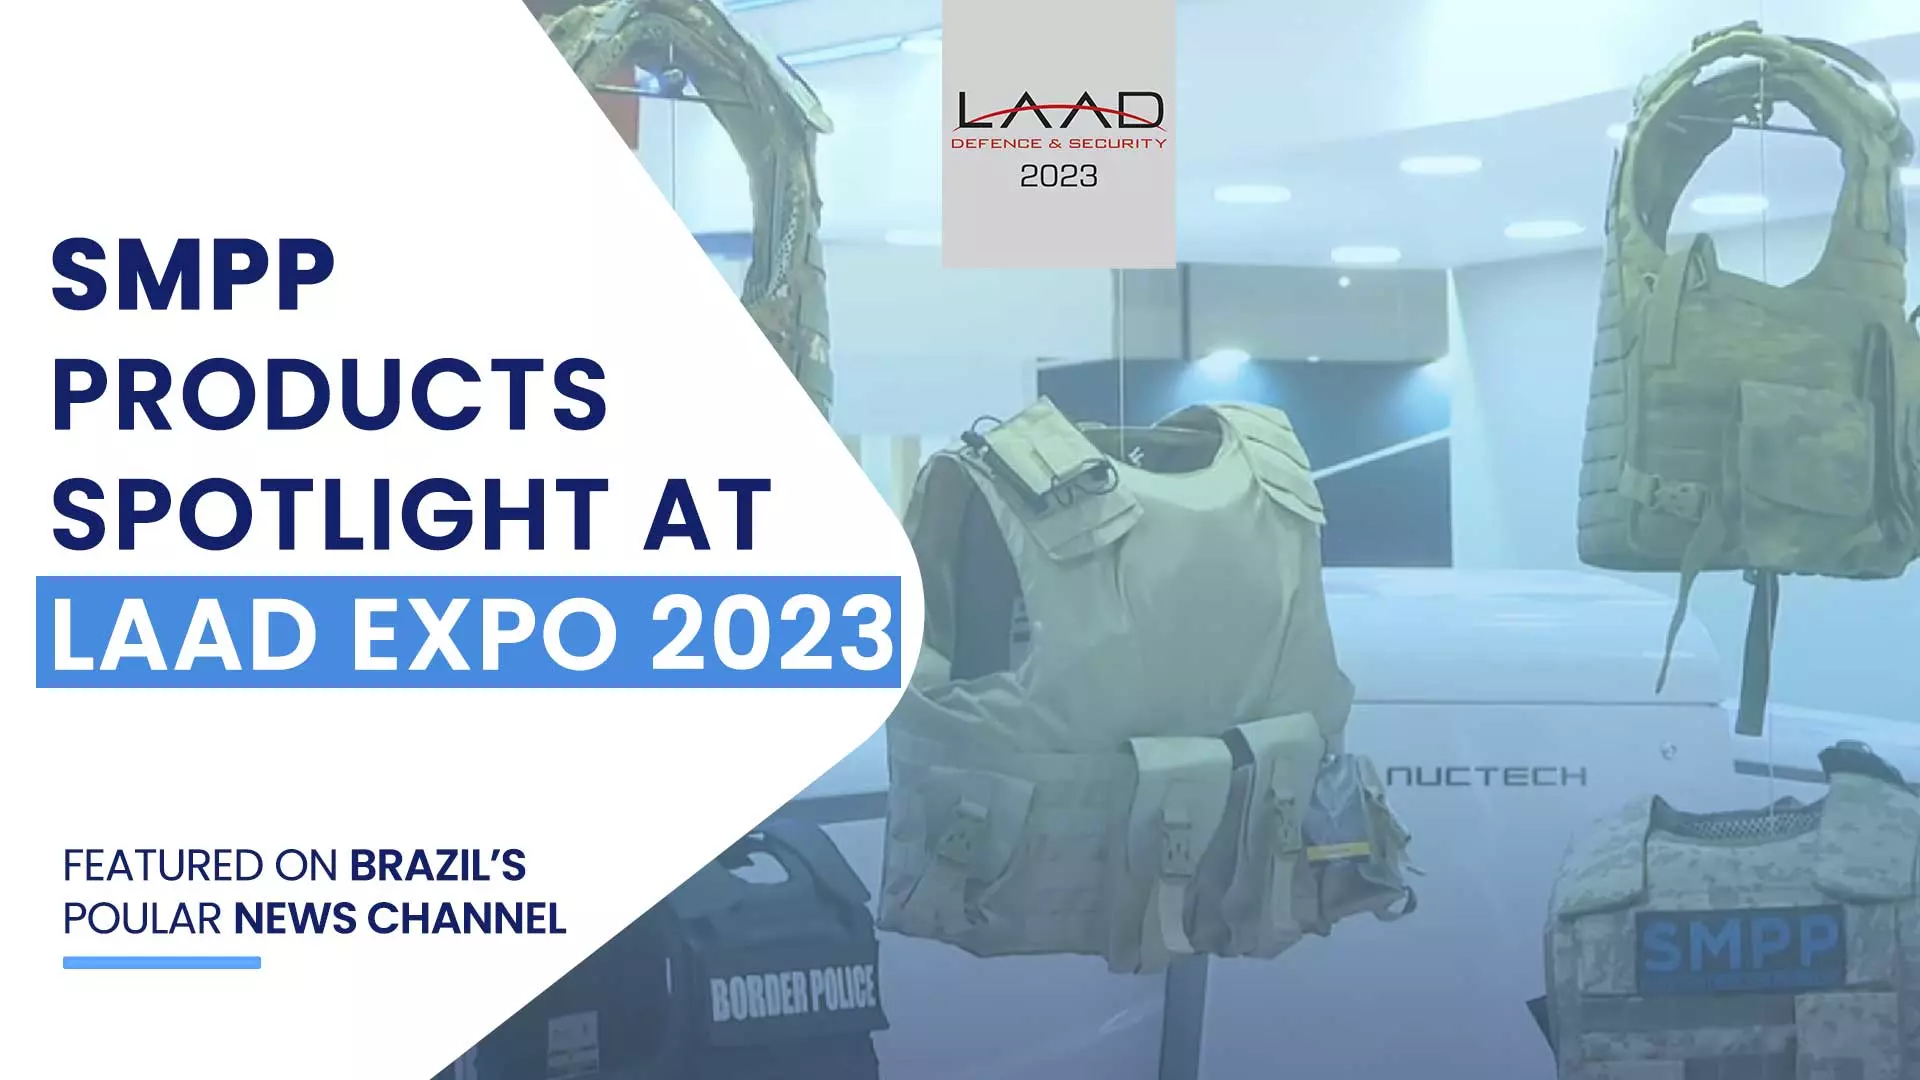 SMPP products spotlight in the show at LAAD Expo 2023 in Rio, featured on Brazil’s popular news channel, The GLOBO.